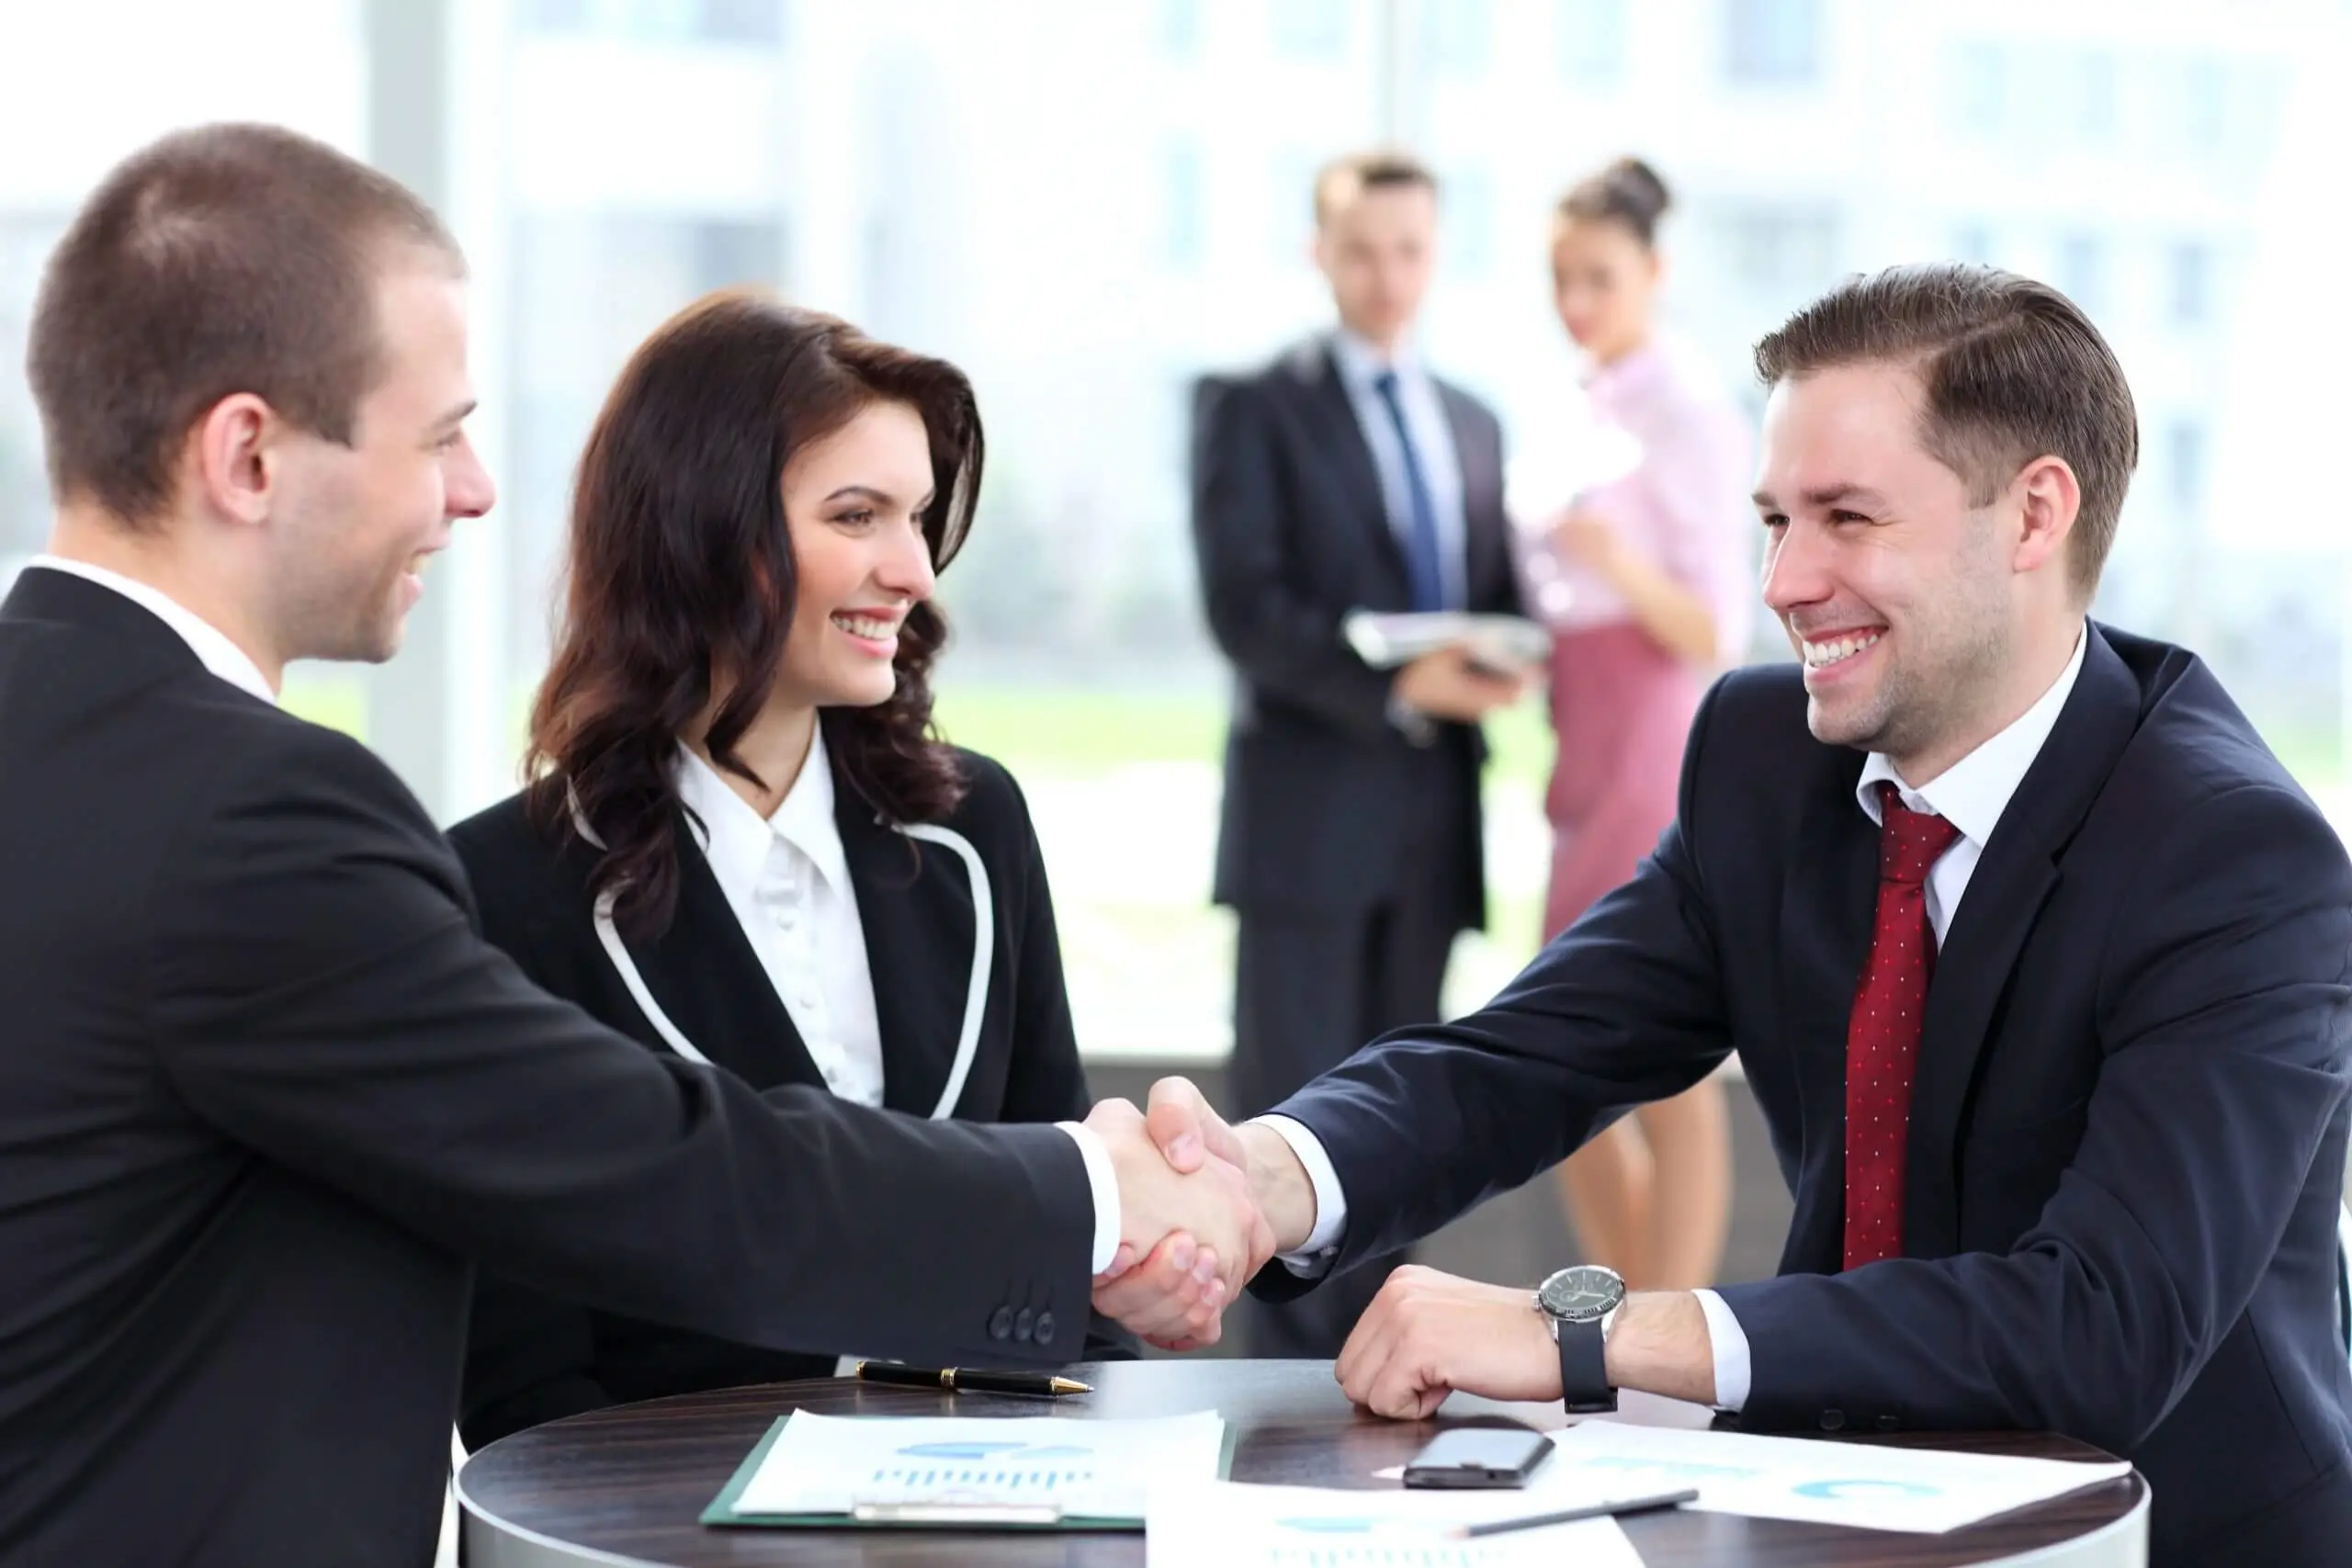 Three business professionals shaking hands